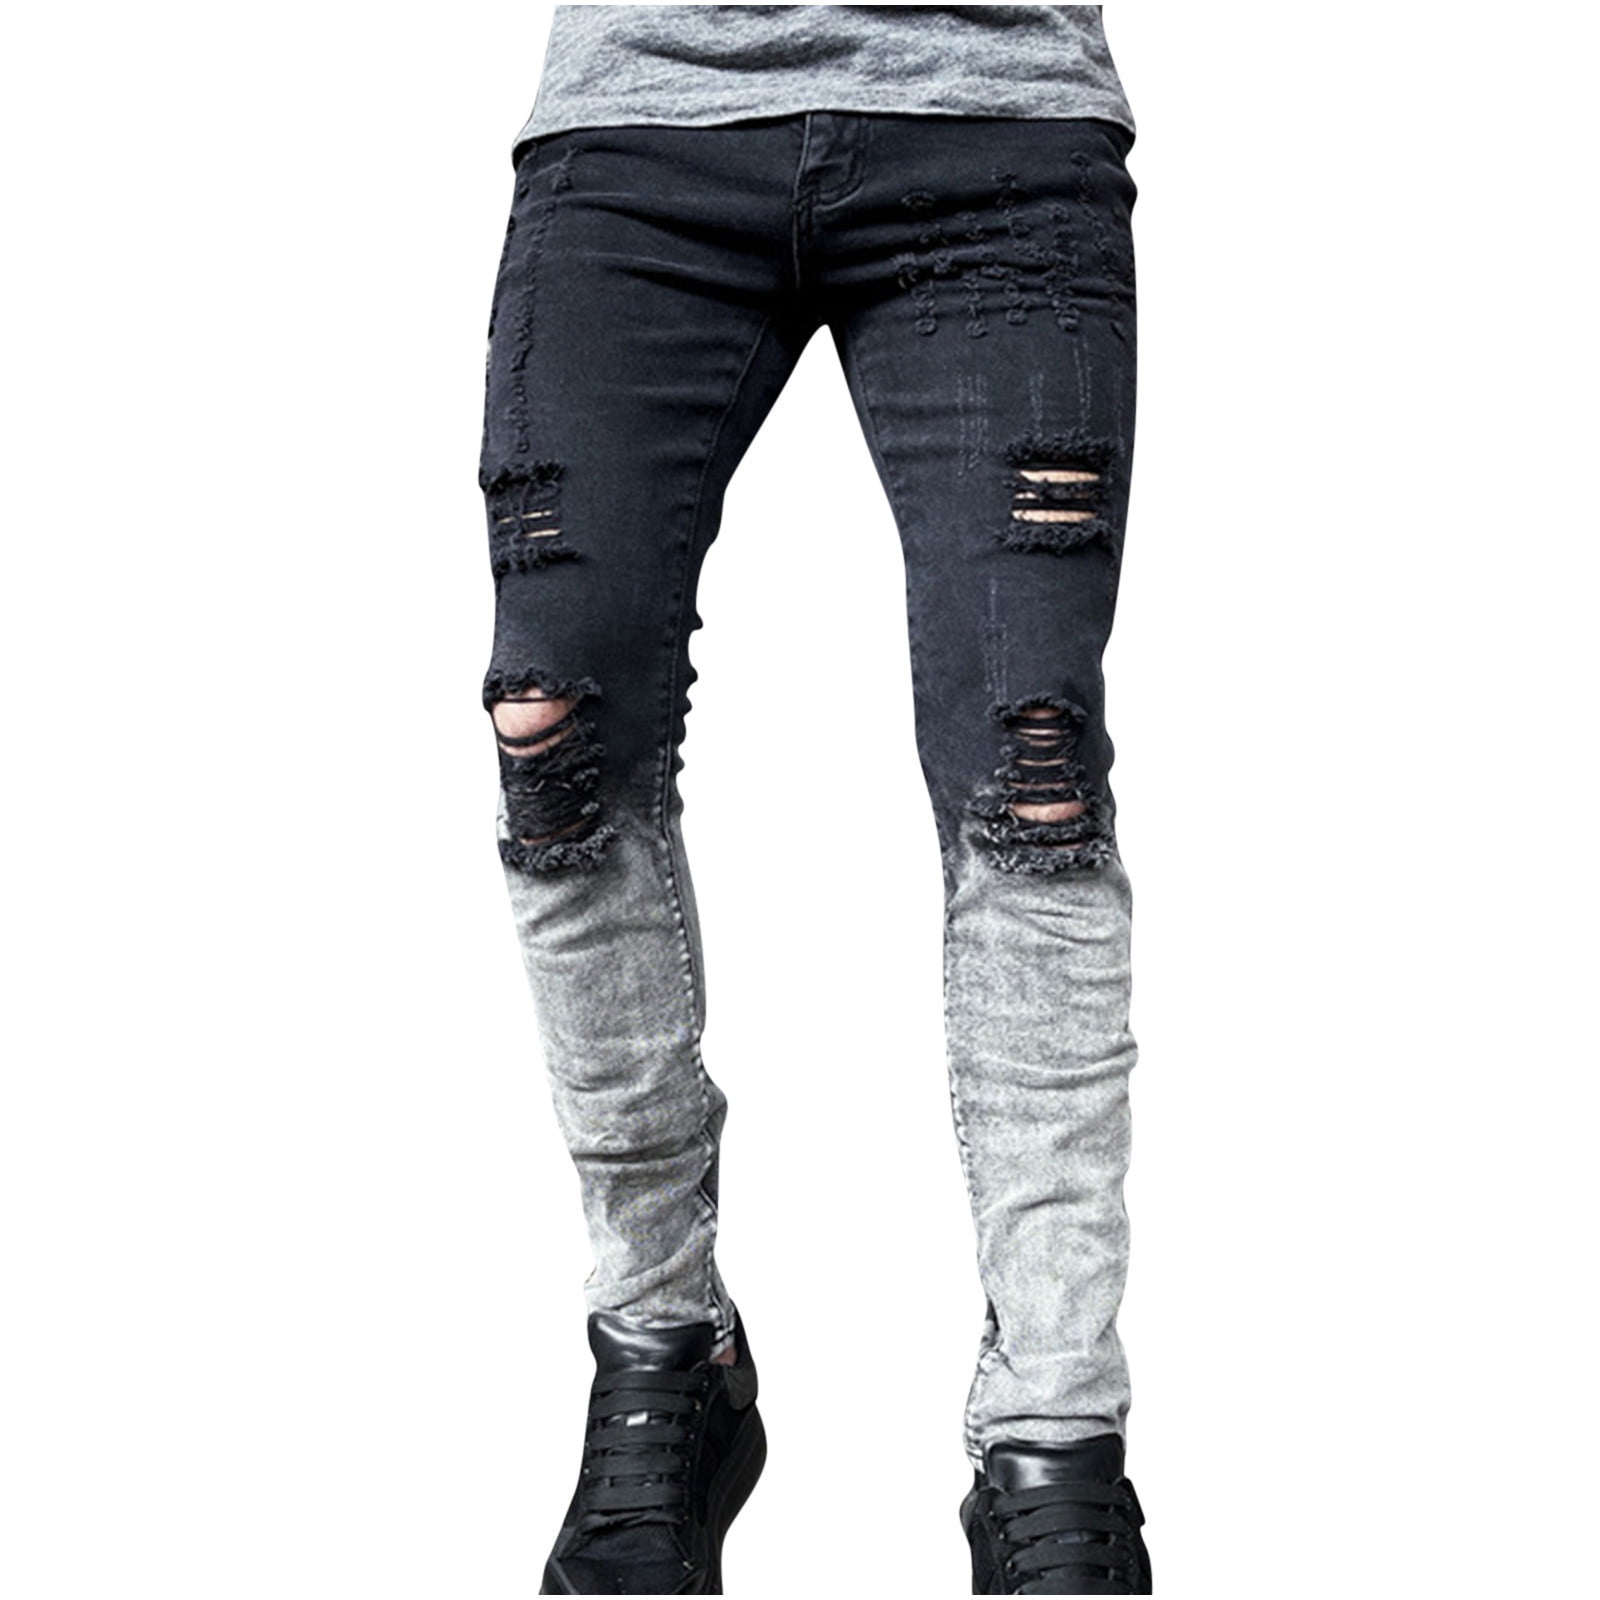 DDAPJ pyju Mens Jeans Ripped Frayed Distressed Jeans Fashion Destroyed  Skinny Jeans Pants Tapered Leg Slim Fit Jeans